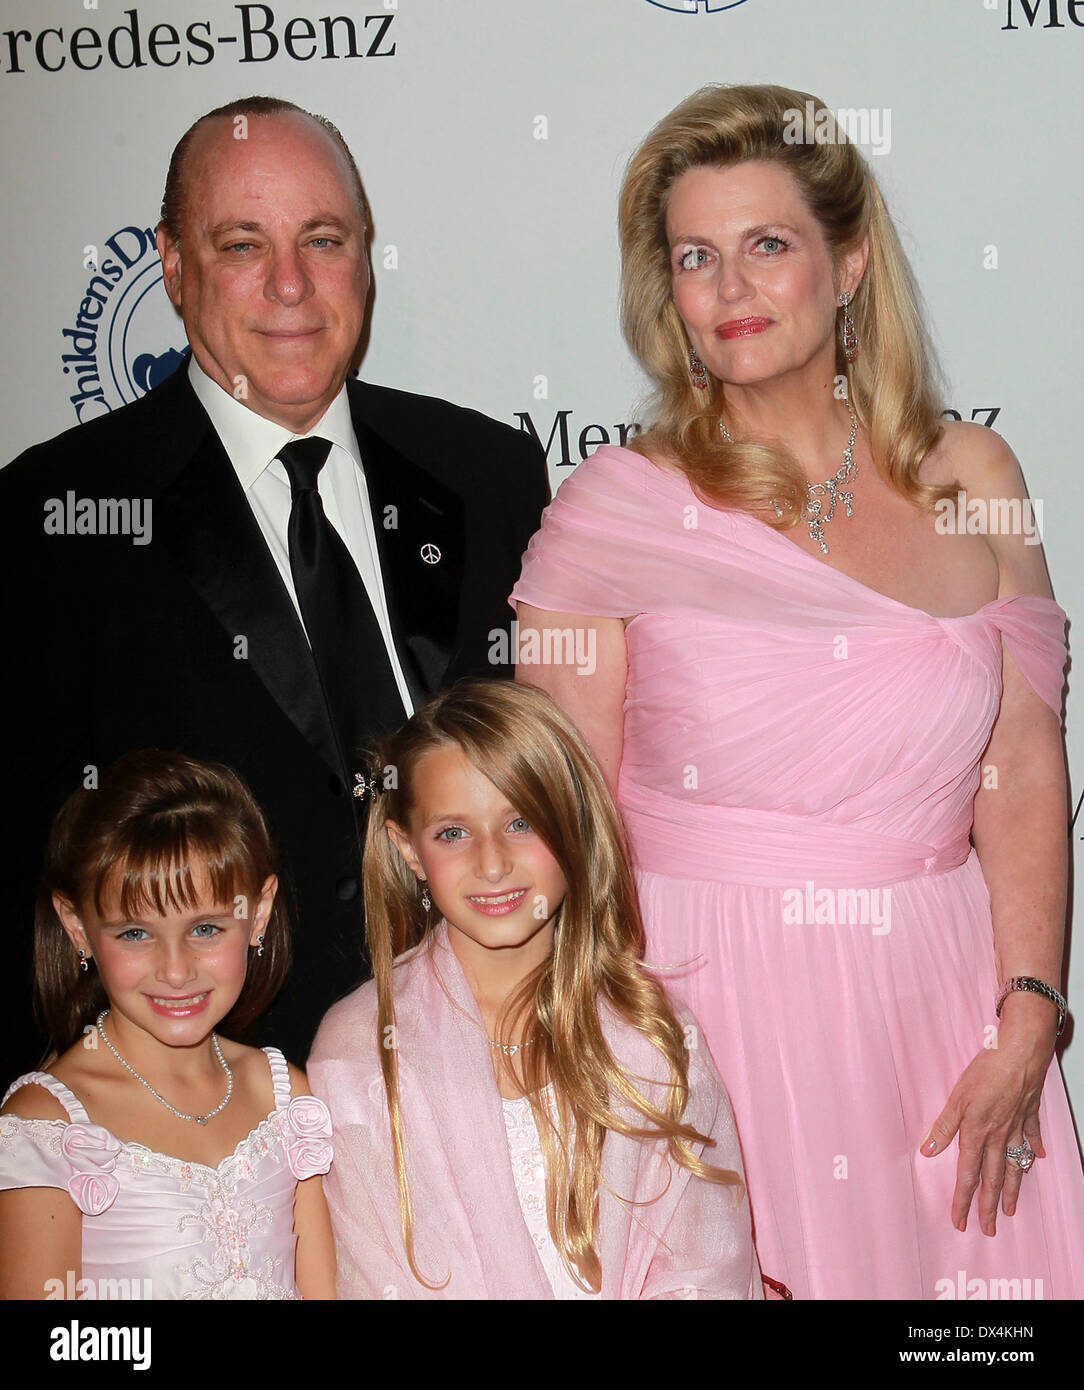 Nancy Davis husband Ken Rickel with daughters Isabella Rickel and Ariana Rickel 26th Anniversary Carousel Of Hope Ball - Presented By Mercedes-Benz - Arrivals Los Angeles, California - 20.10.12 Where: Beverly Hills, California, United States When: 20 Oct 2012 Stock Photo